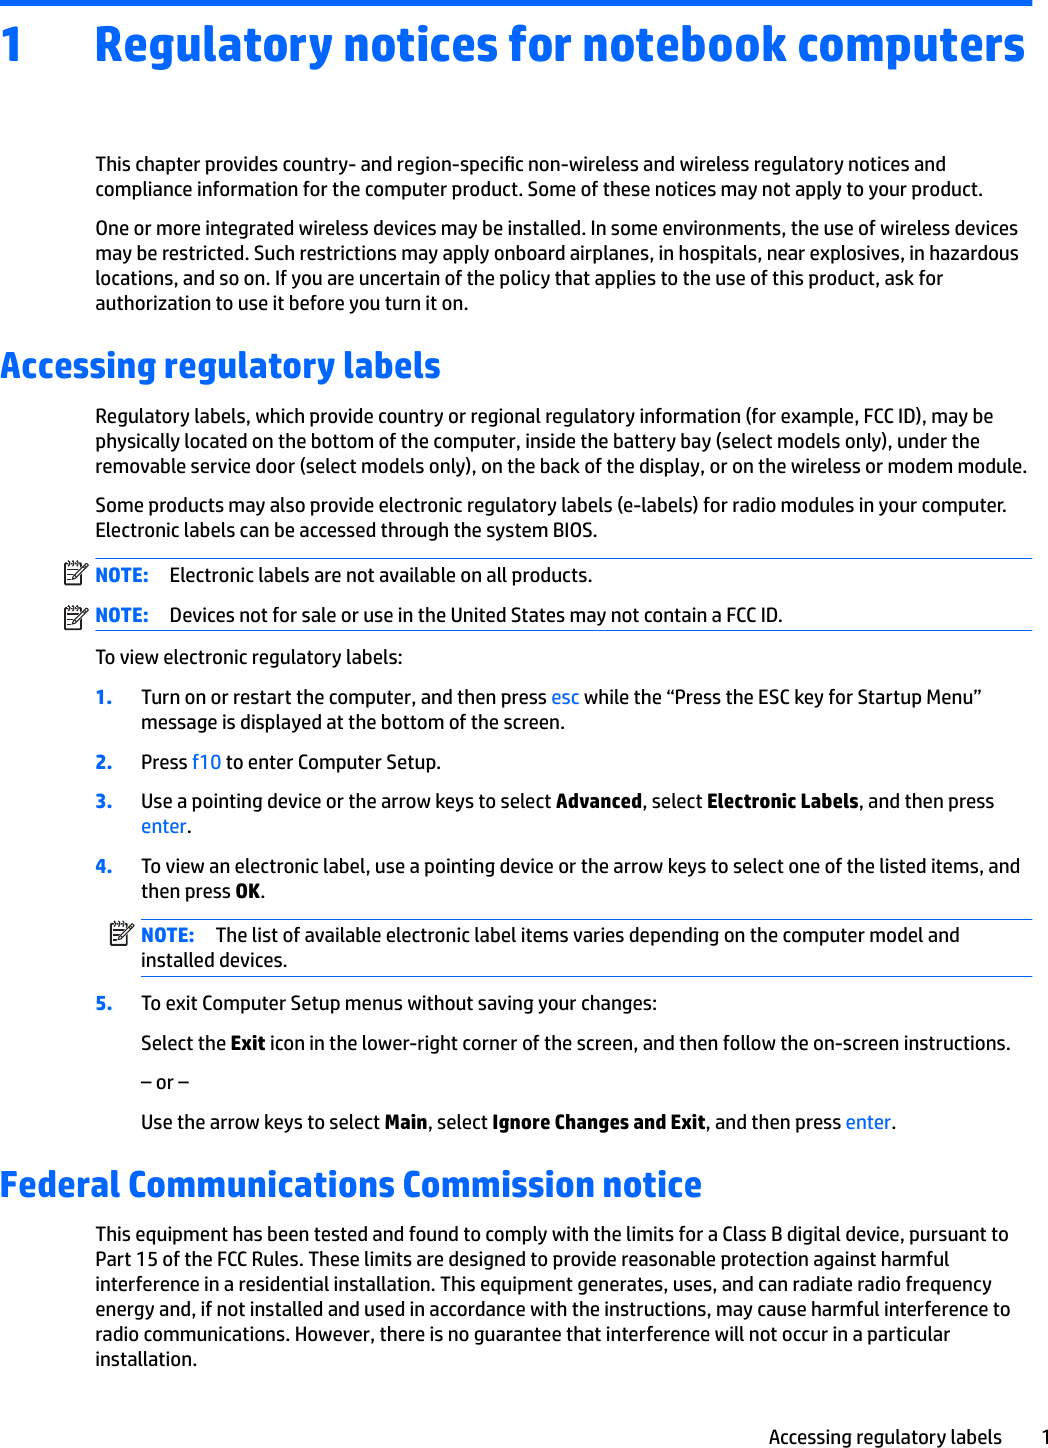 1 Regulatory notices for notebook computersThis chapter provides country- and region-specic non-wireless and wireless regulatory notices and compliance information for the computer product. Some of these notices may not apply to your product.One or more integrated wireless devices may be installed. In some environments, the use of wireless devices may be restricted. Such restrictions may apply onboard airplanes, in hospitals, near explosives, in hazardous locations, and so on. If you are uncertain of the policy that applies to the use of this product, ask for authorization to use it before you turn it on.Accessing regulatory labelsRegulatory labels, which provide country or regional regulatory information (for example, FCC ID), may be physically located on the bottom of the computer, inside the battery bay (select models only), under the removable service door (select models only), on the back of the display, or on the wireless or modem module.Some products may also provide electronic regulatory labels (e-labels) for radio modules in your computer. Electronic labels can be accessed through the system BIOS.NOTE: Electronic labels are not available on all products.NOTE: Devices not for sale or use in the United States may not contain a FCC ID. To view electronic regulatory labels:1. Turn on or restart the computer, and then press esc while the “Press the ESC key for Startup Menu” message is displayed at the bottom of the screen.2. Press f10 to enter Computer Setup.3. Use a pointing device or the arrow keys to select Advanced, select Electronic Labels, and then press enter.4. To view an electronic label, use a pointing device or the arrow keys to select one of the listed items, and then press OK.NOTE: The list of available electronic label items varies depending on the computer model and installed devices.5. To exit Computer Setup menus without saving your changes:Select the Exit icon in the lower-right corner of the screen, and then follow the on-screen instructions.– or –Use the arrow keys to select Main, select Ignore Changes and Exit, and then press enter.Federal Communications Commission noticeThis equipment has been tested and found to comply with the limits for a Class B digital device, pursuant to Part 15 of the FCC Rules. These limits are designed to provide reasonable protection against harmful interference in a residential installation. This equipment generates, uses, and can radiate radio frequency energy and, if not installed and used in accordance with the instructions, may cause harmful interference to radio communications. However, there is no guarantee that interference will not occur in a particular installation.Accessing regulatory labels 1